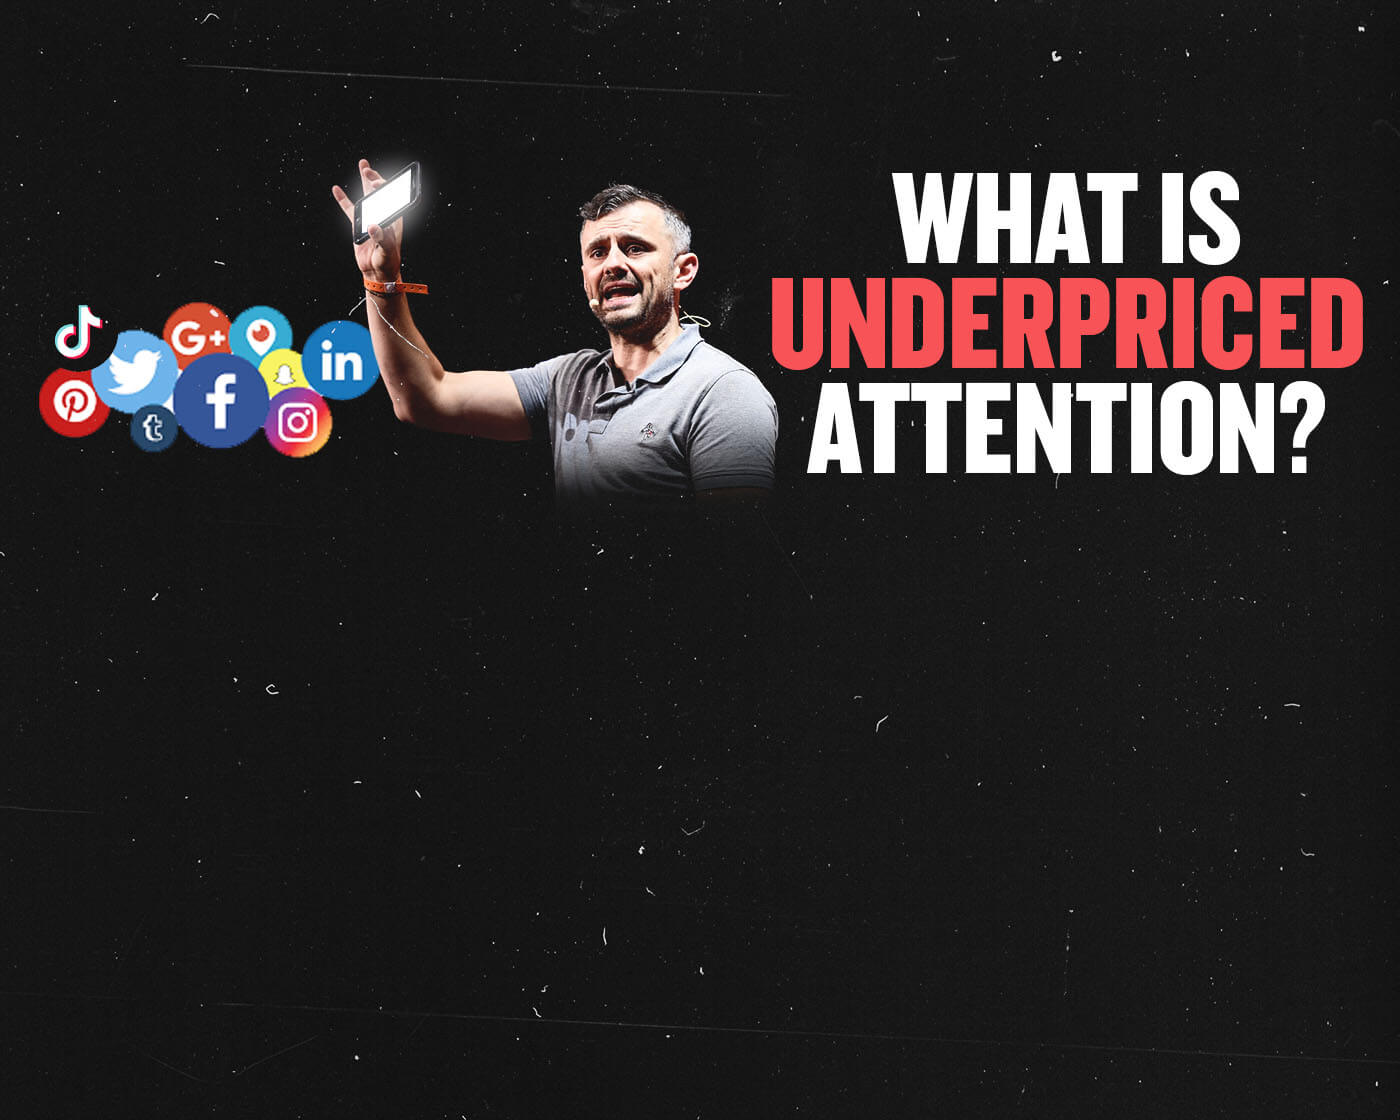 What Is Underpriced Attention?